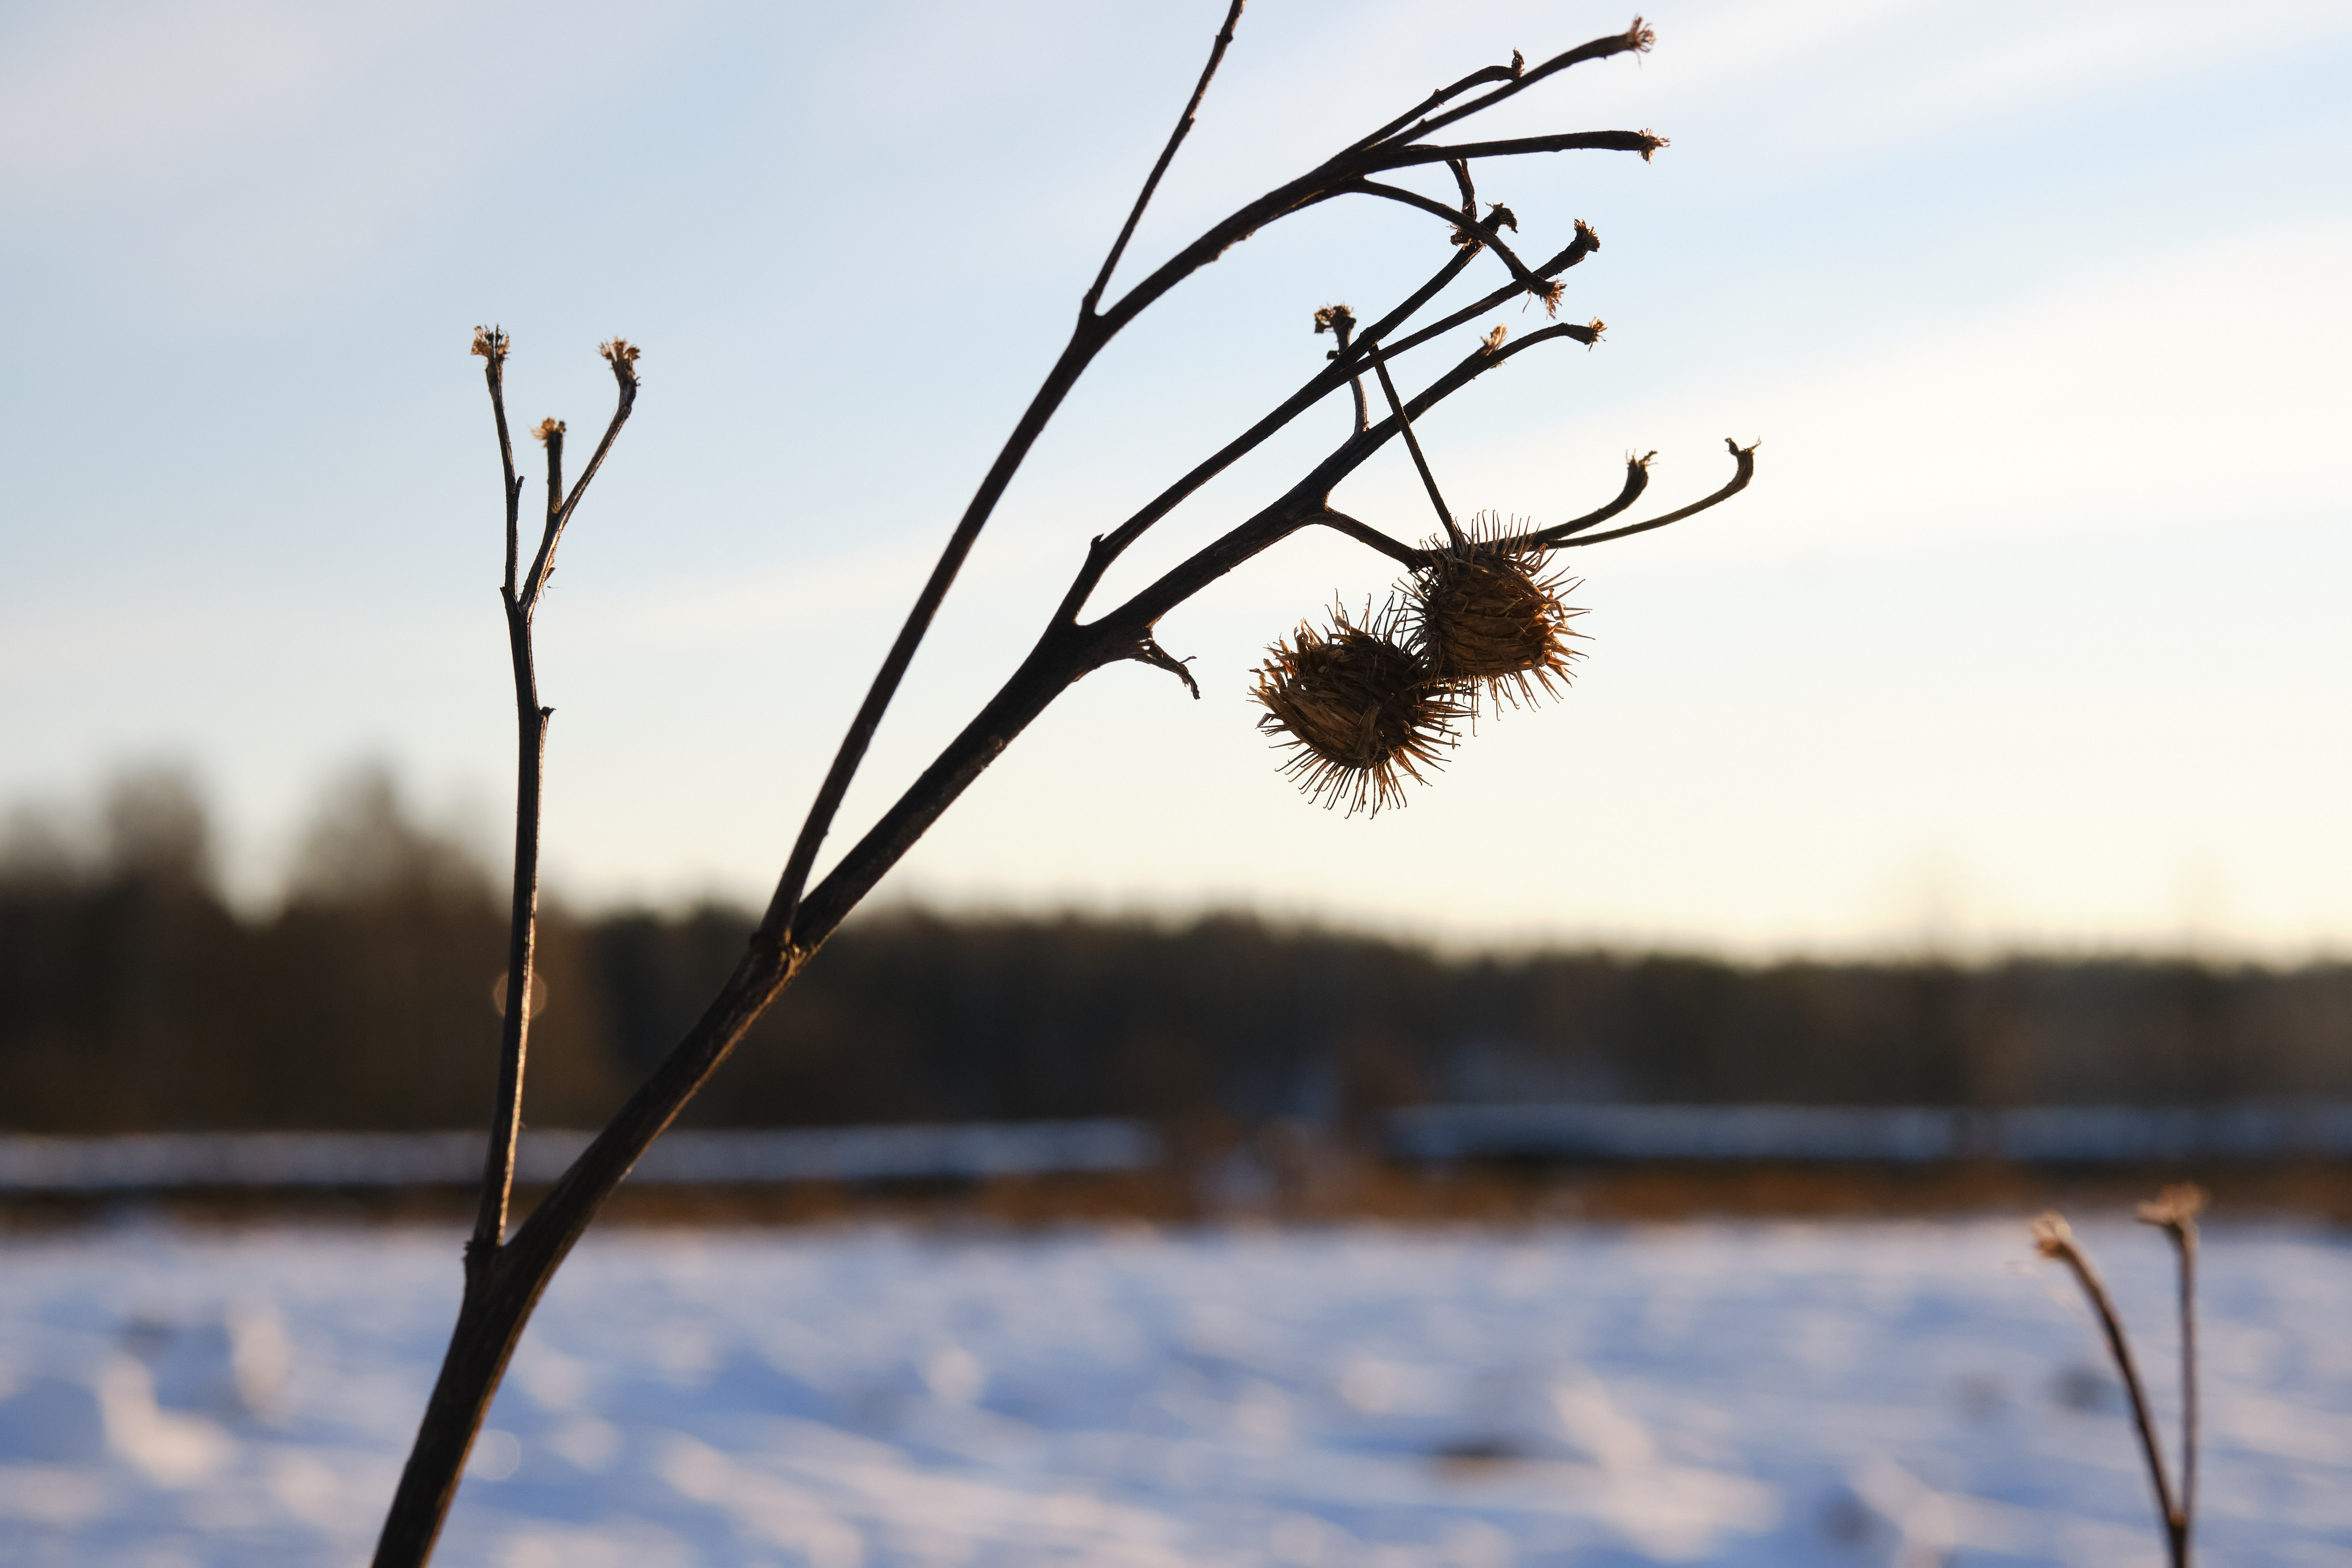 A close up of a dried plant and seeds, with a snowy background.